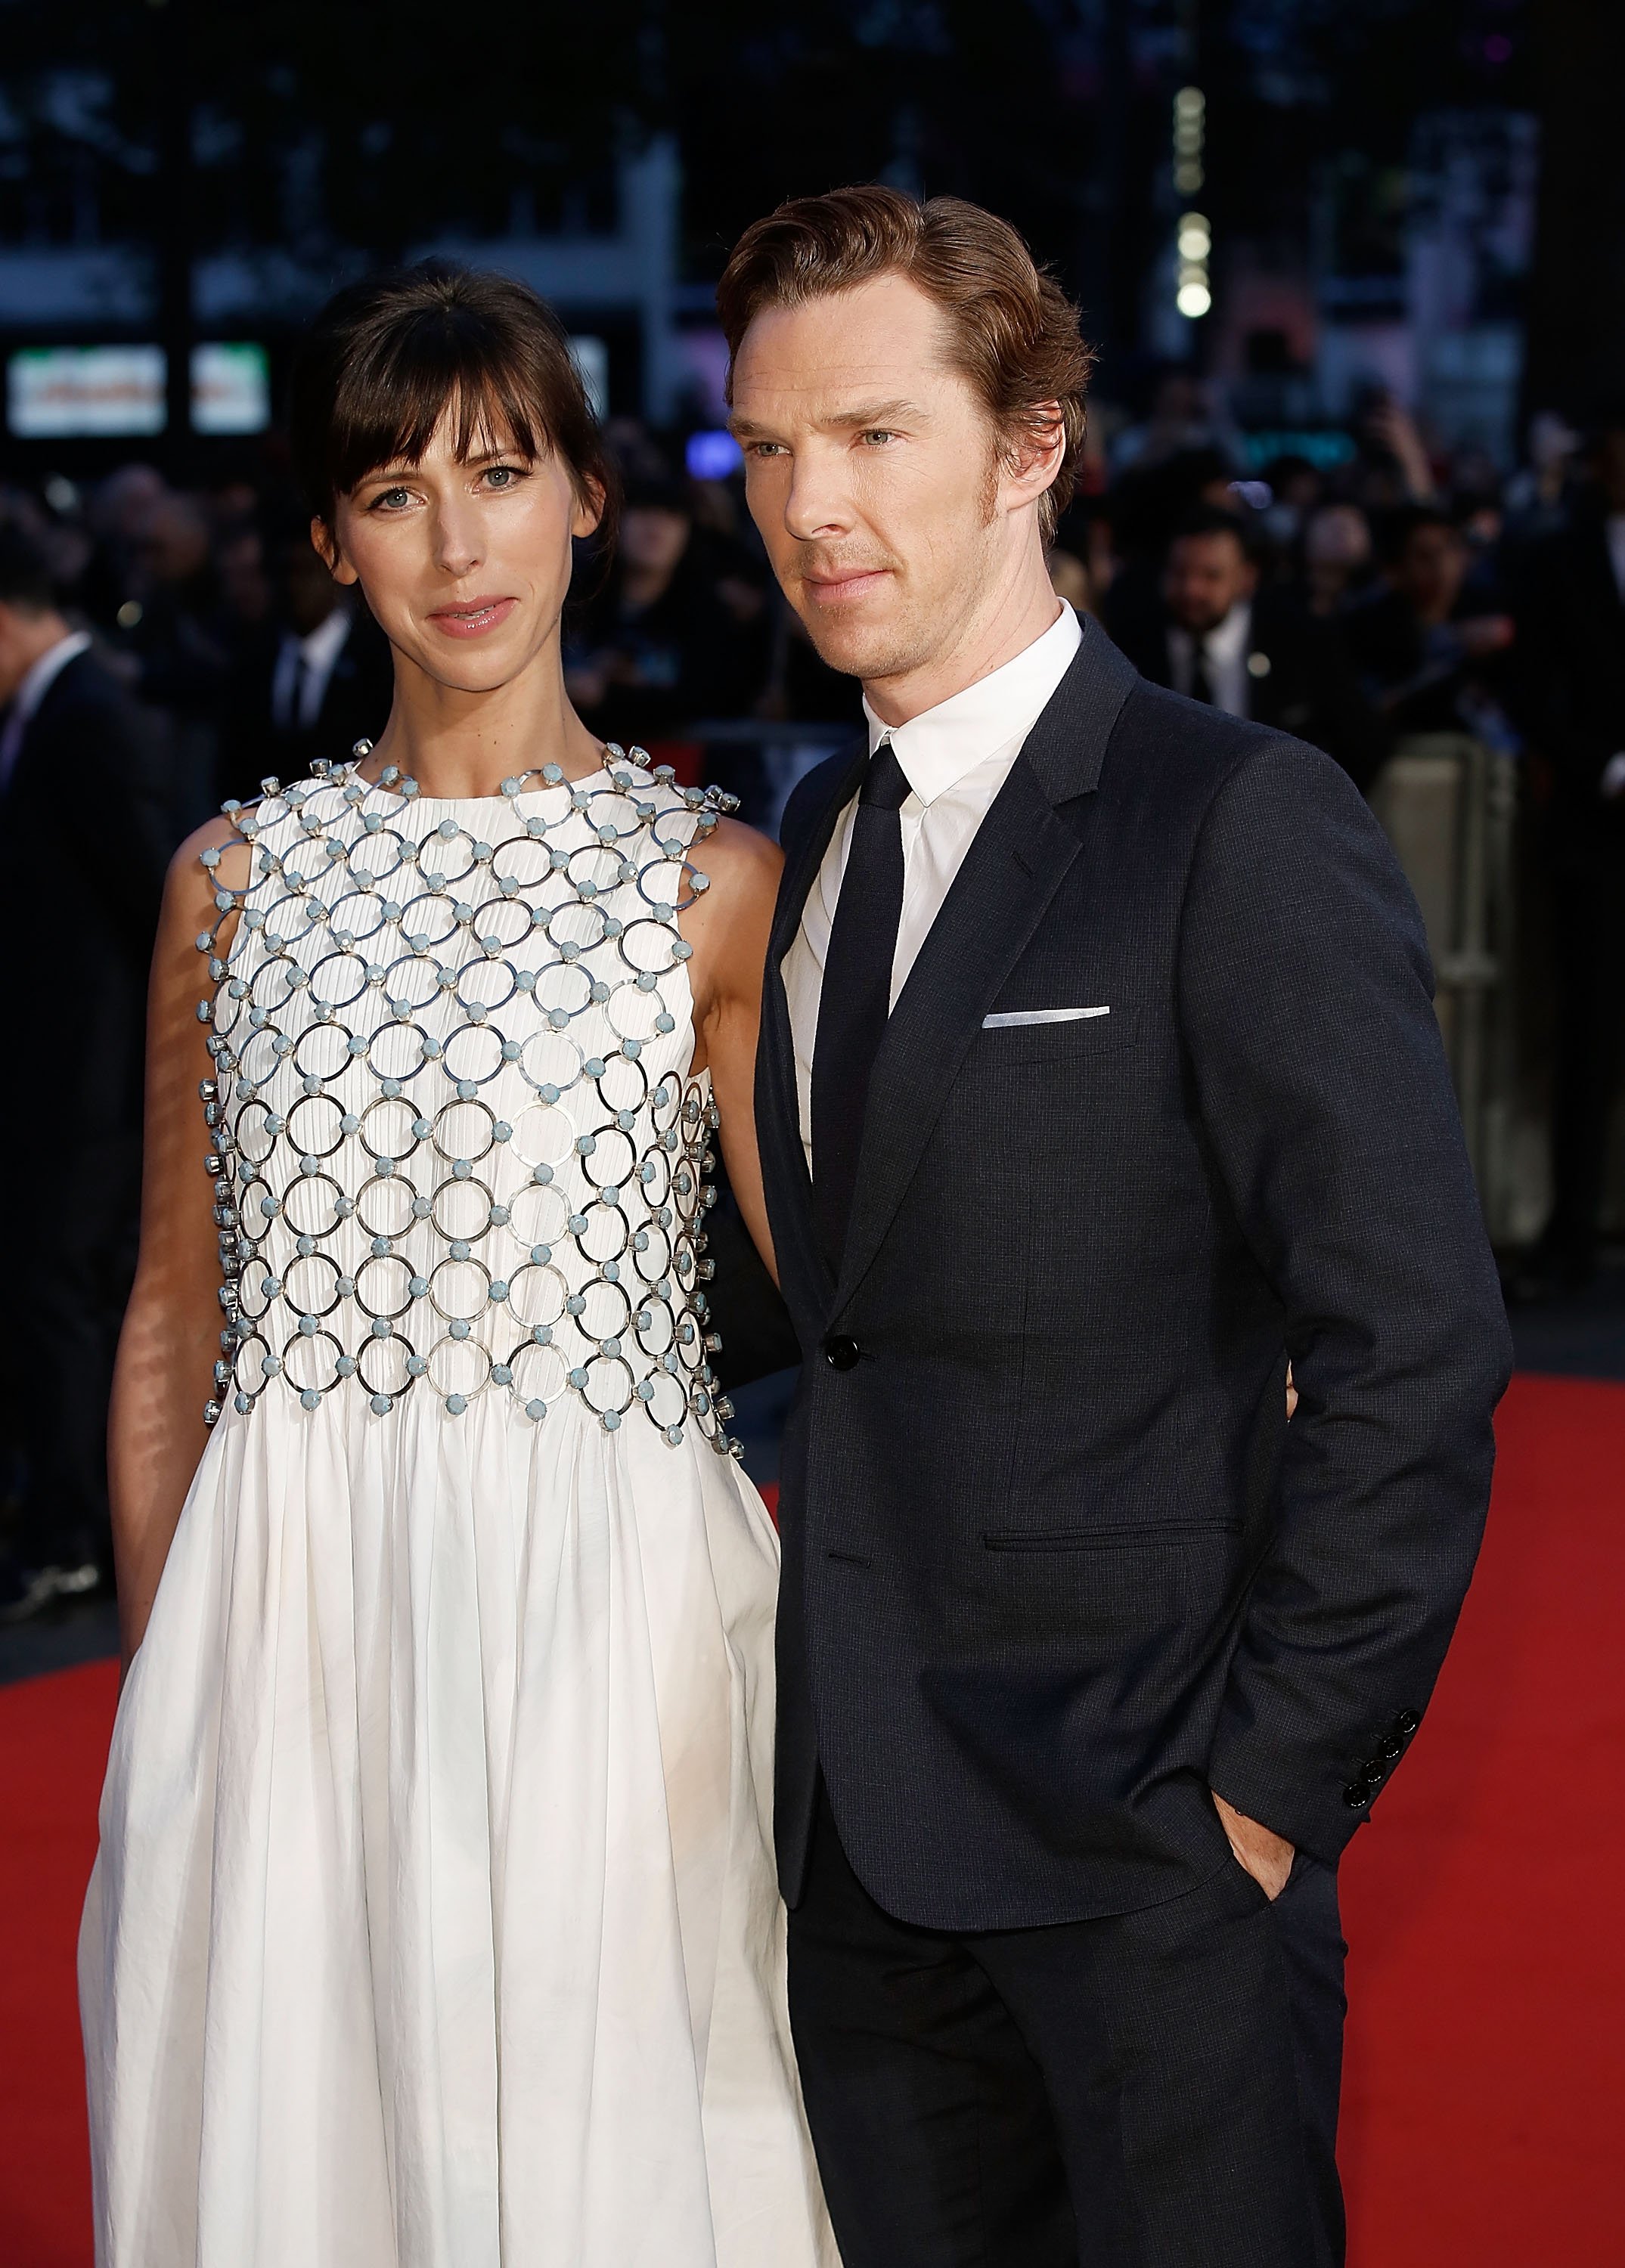 Benedict Cumberbatch and Sophie Hunter attend the "Black Mass" Virgin Atlantic Gala screening during the BFI London Film Festival, at Odeon Leicester Square on October 11, 2015 in London, England. | Photo: Getty Images